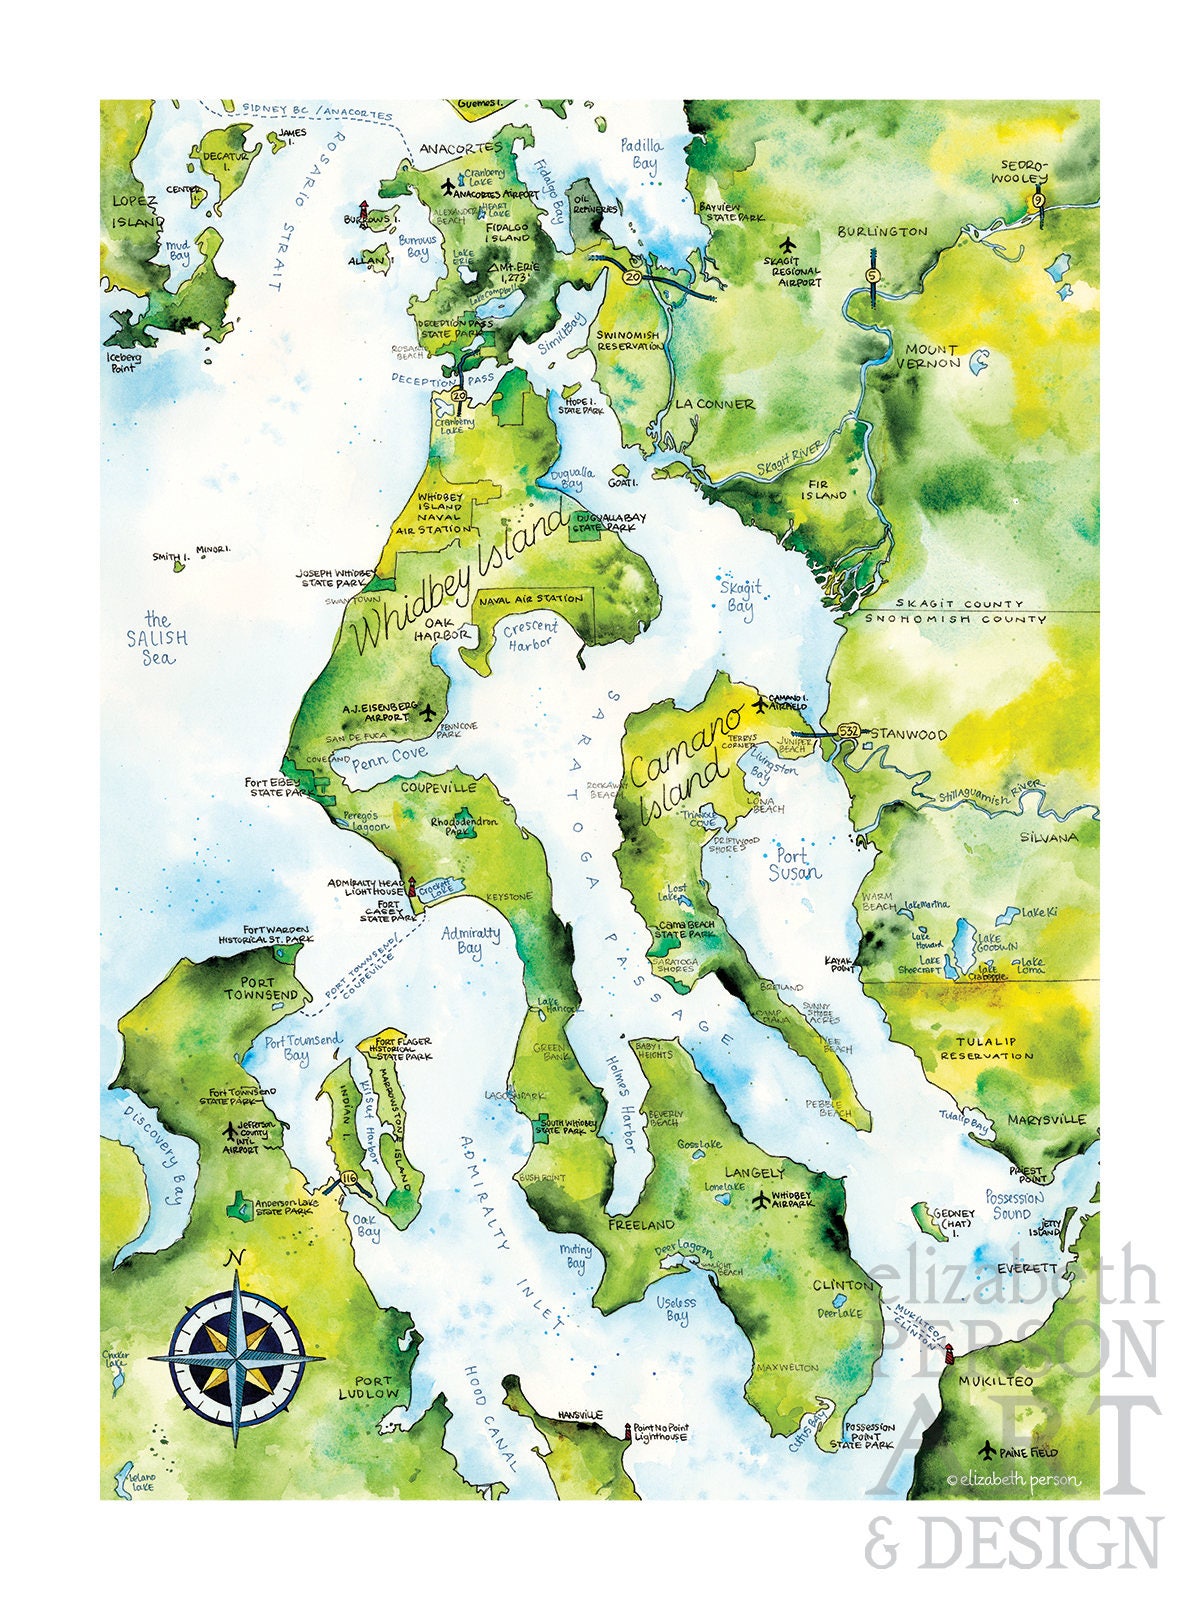 Whidbey Island and Camano Island Map Watercolor Illustration photo picture picture